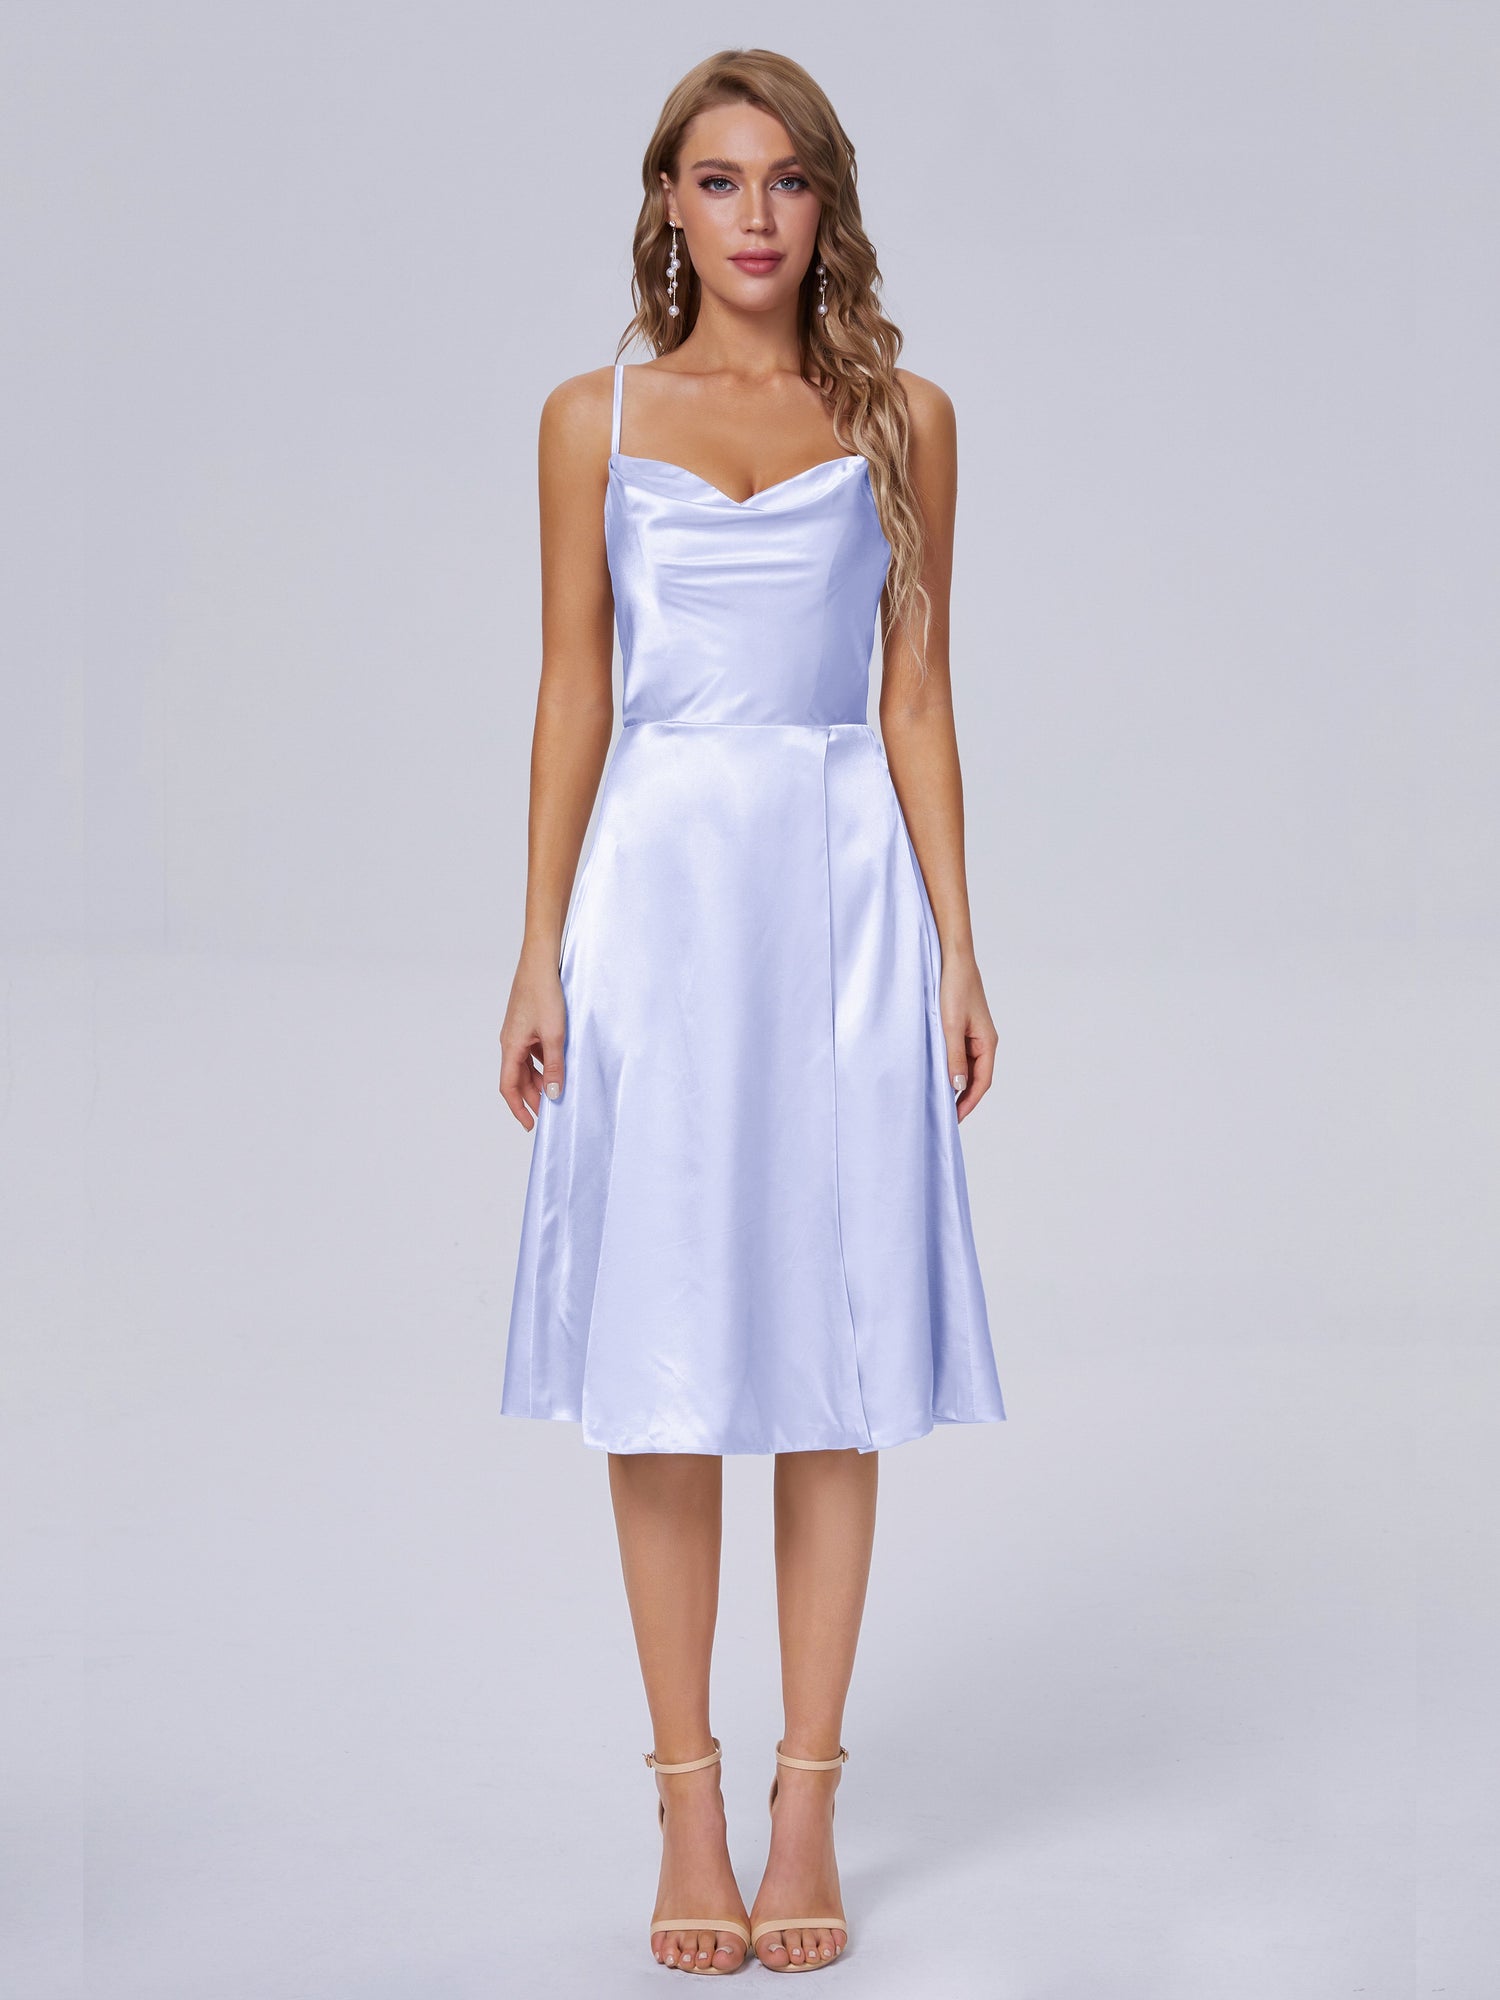 Bridesmaid This Satin the Dreamy Looking You is For Are Dress